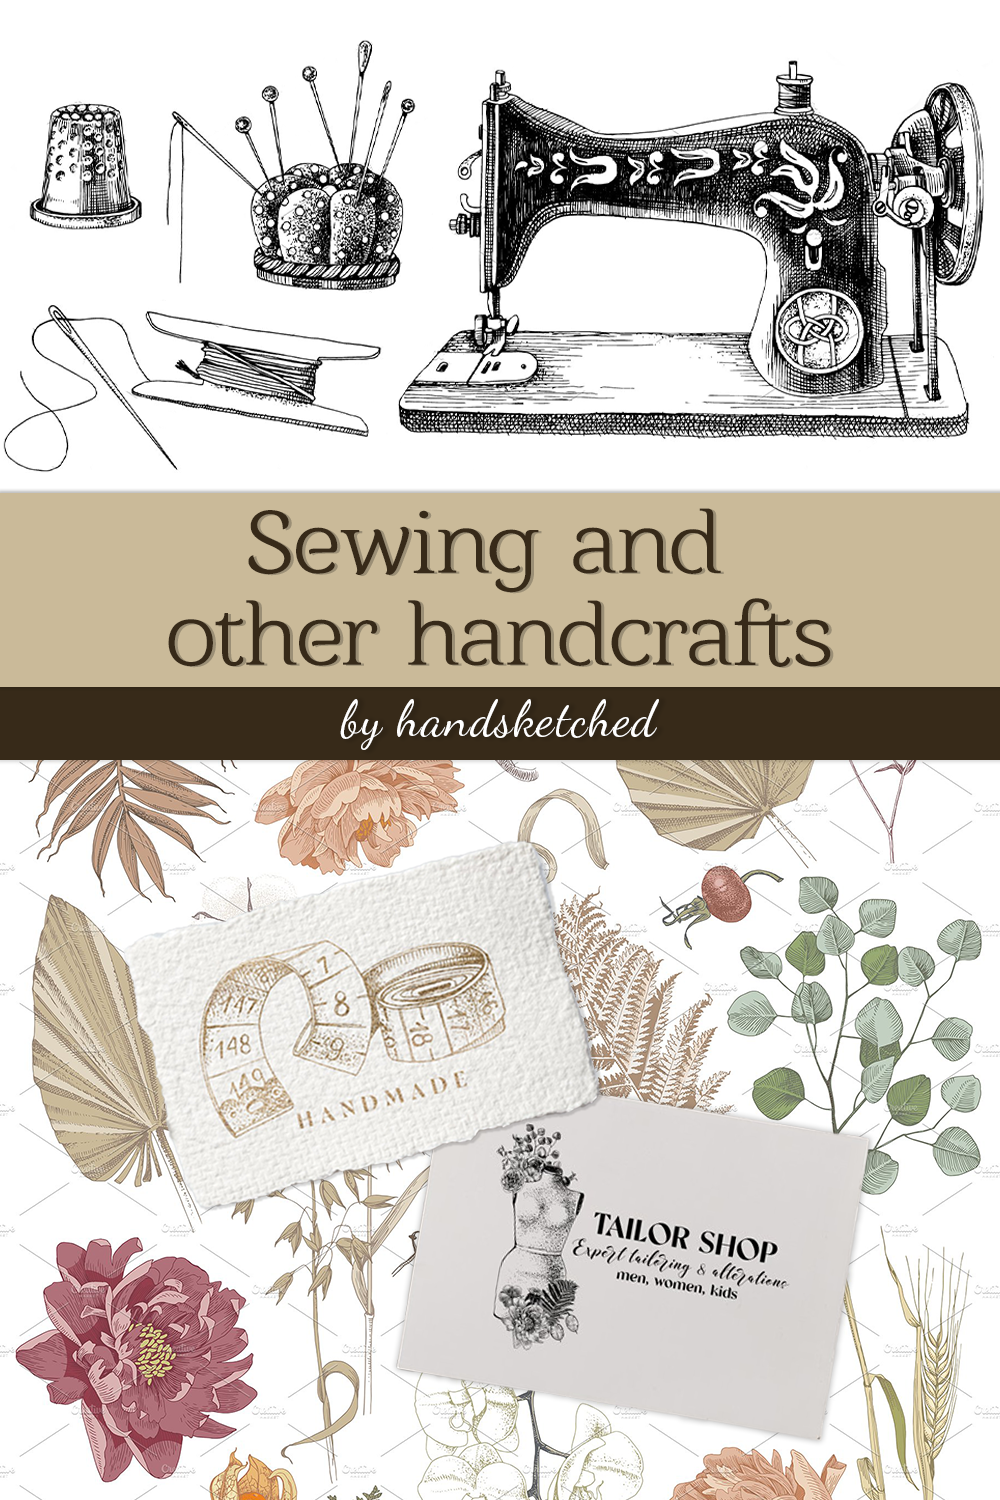 Sewing and other handcrafts of pinterest.